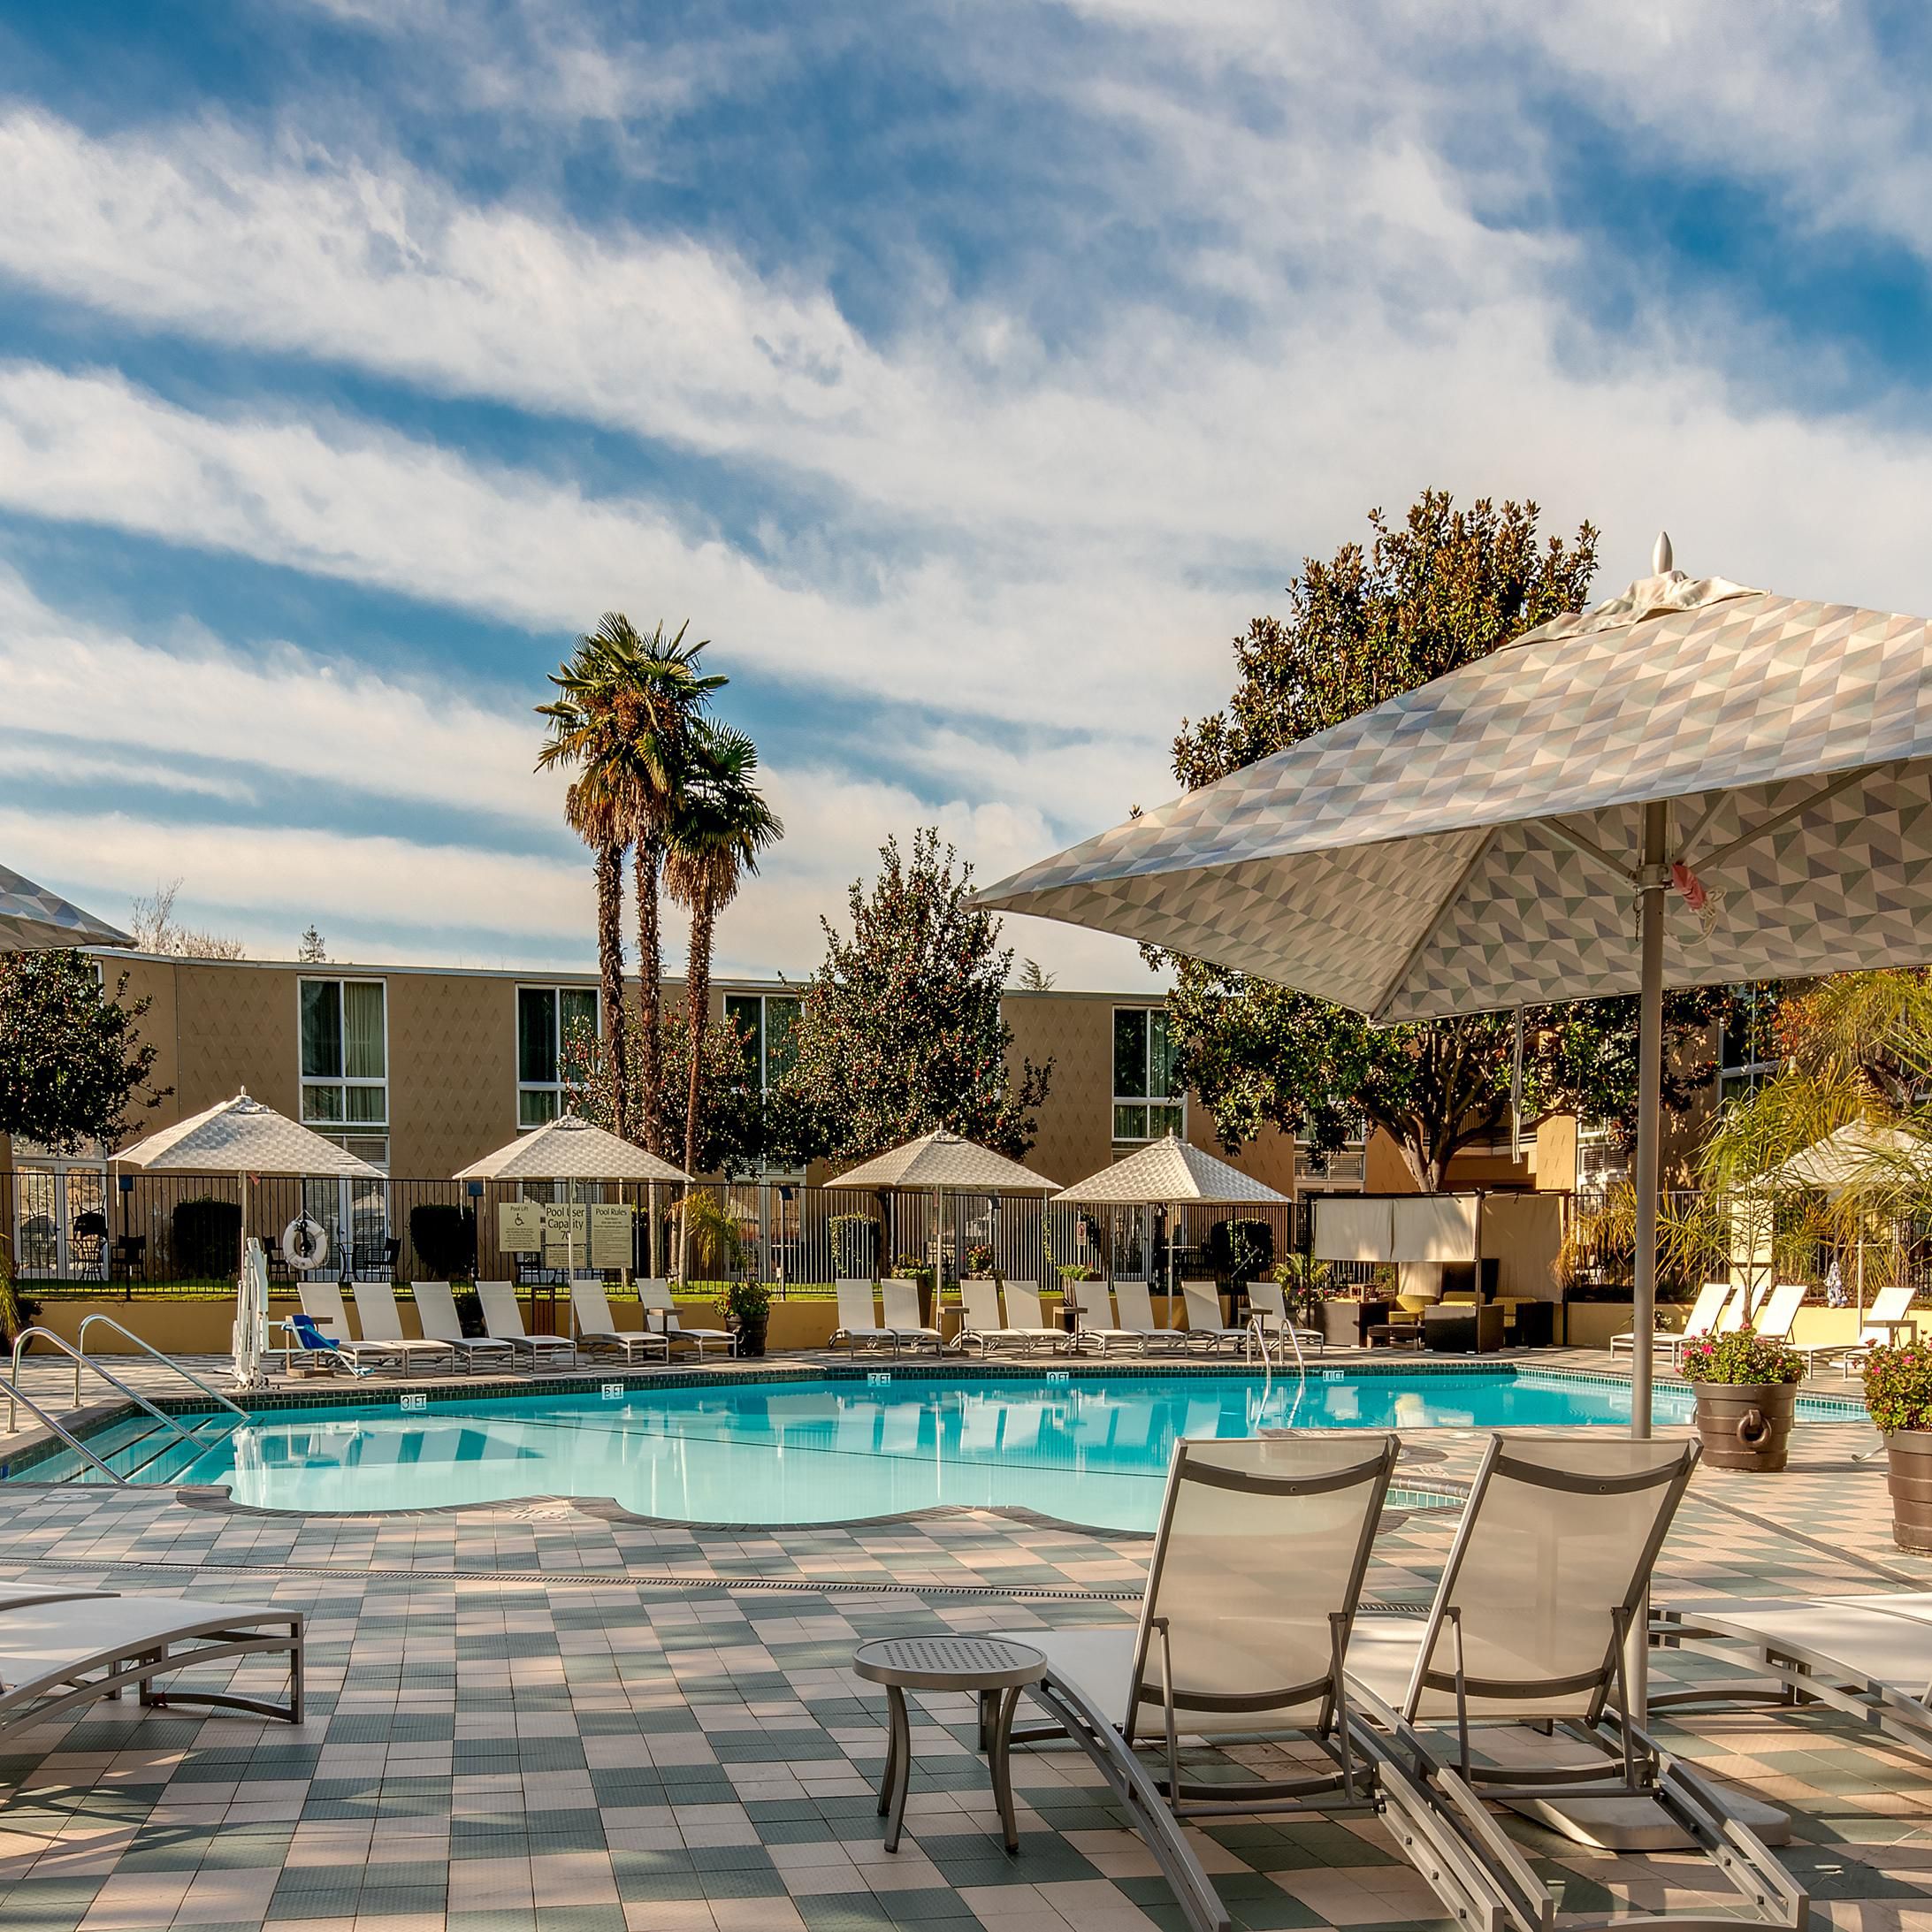 Unwind in our outdoor heated pool and relax on the large pool deck